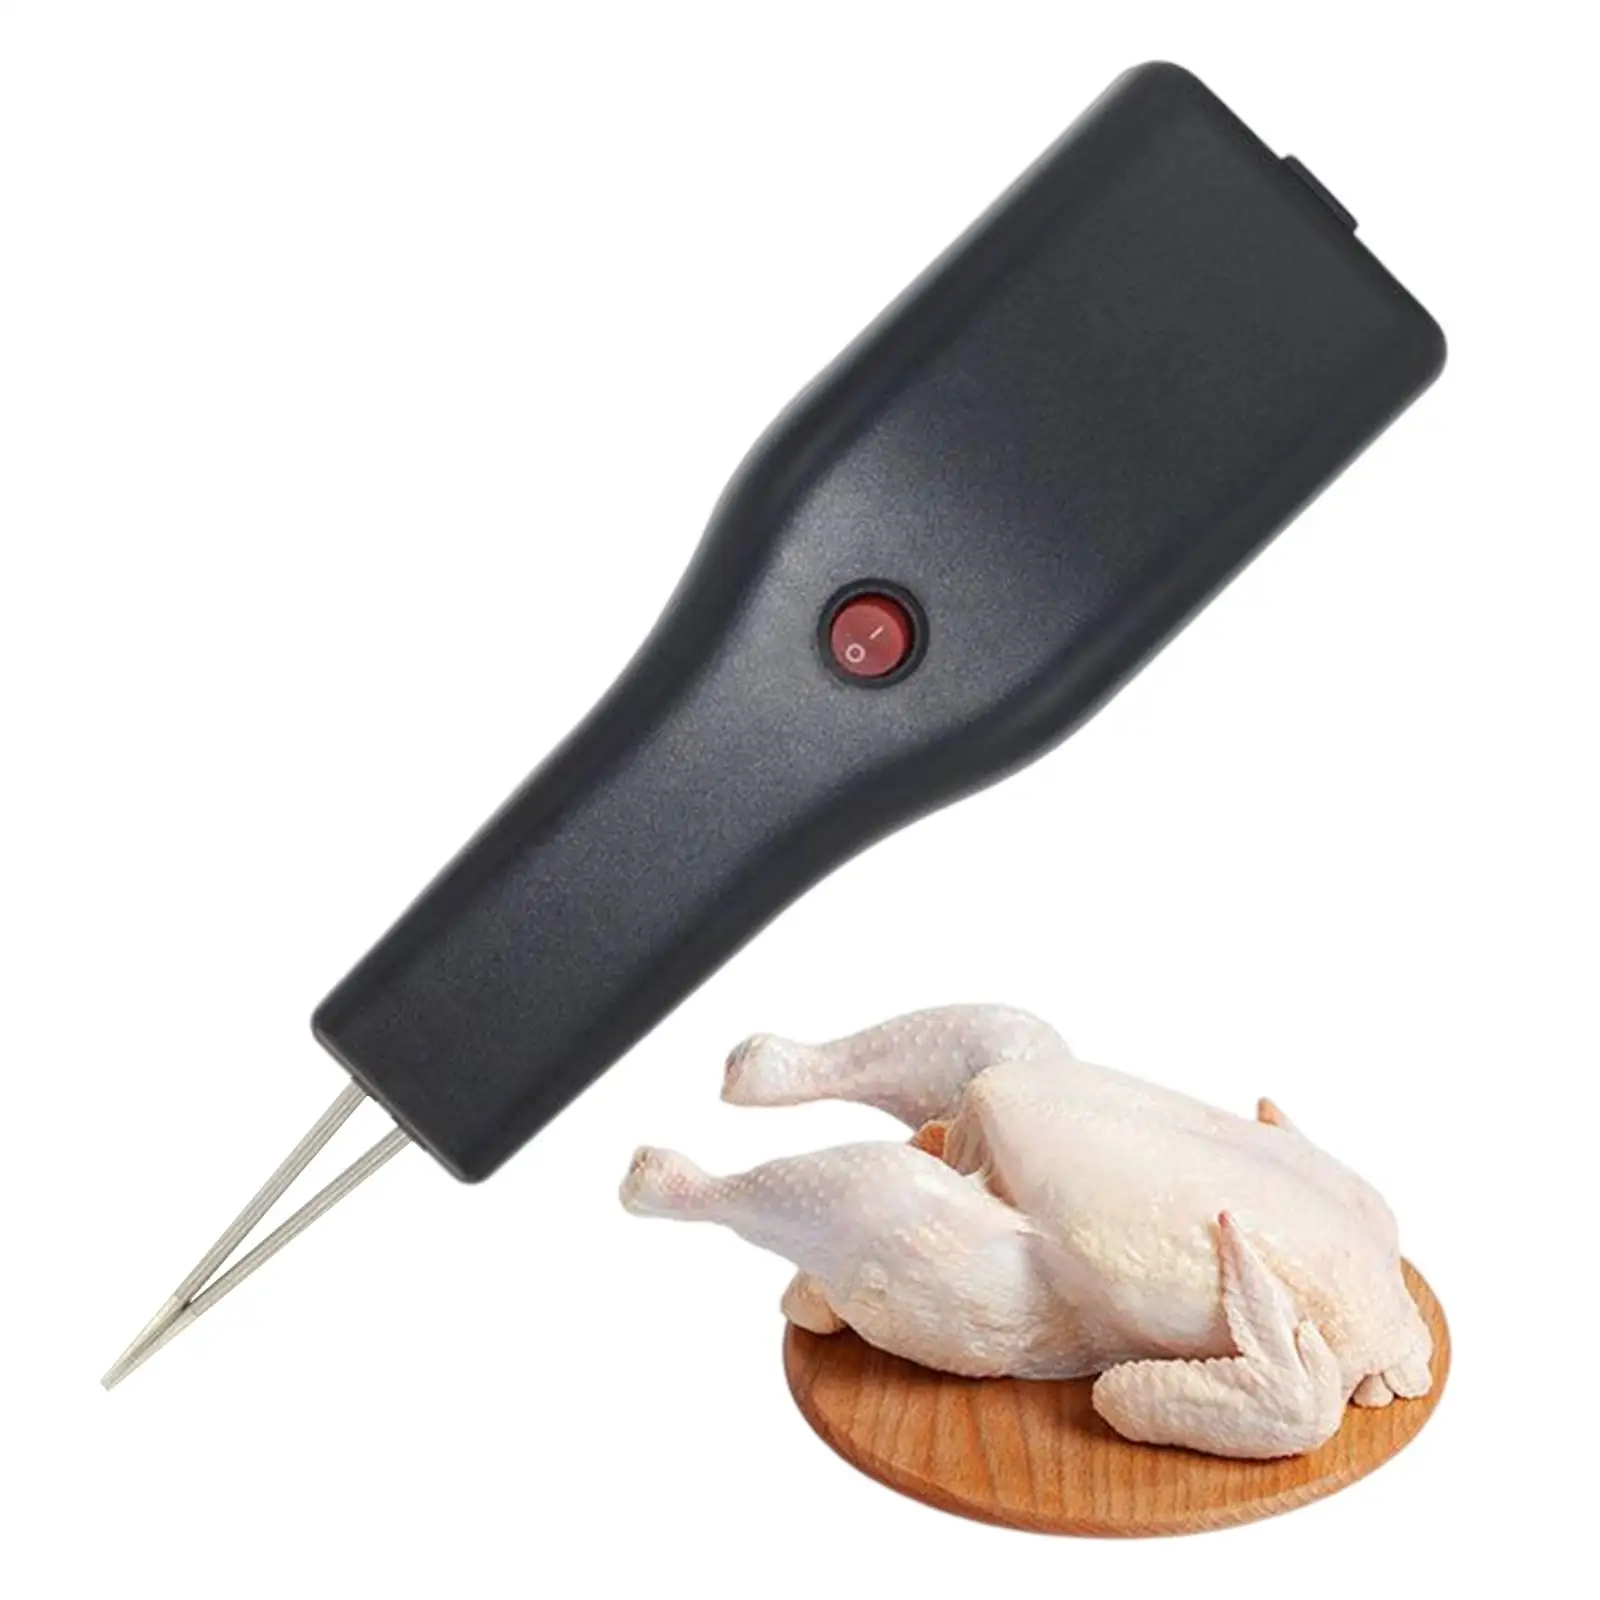 Handheld Electric Poultry Plucker Fittings Feather Plucking Durable Portable Plug and Play for Outdoor Home BBQ Duck US Plug